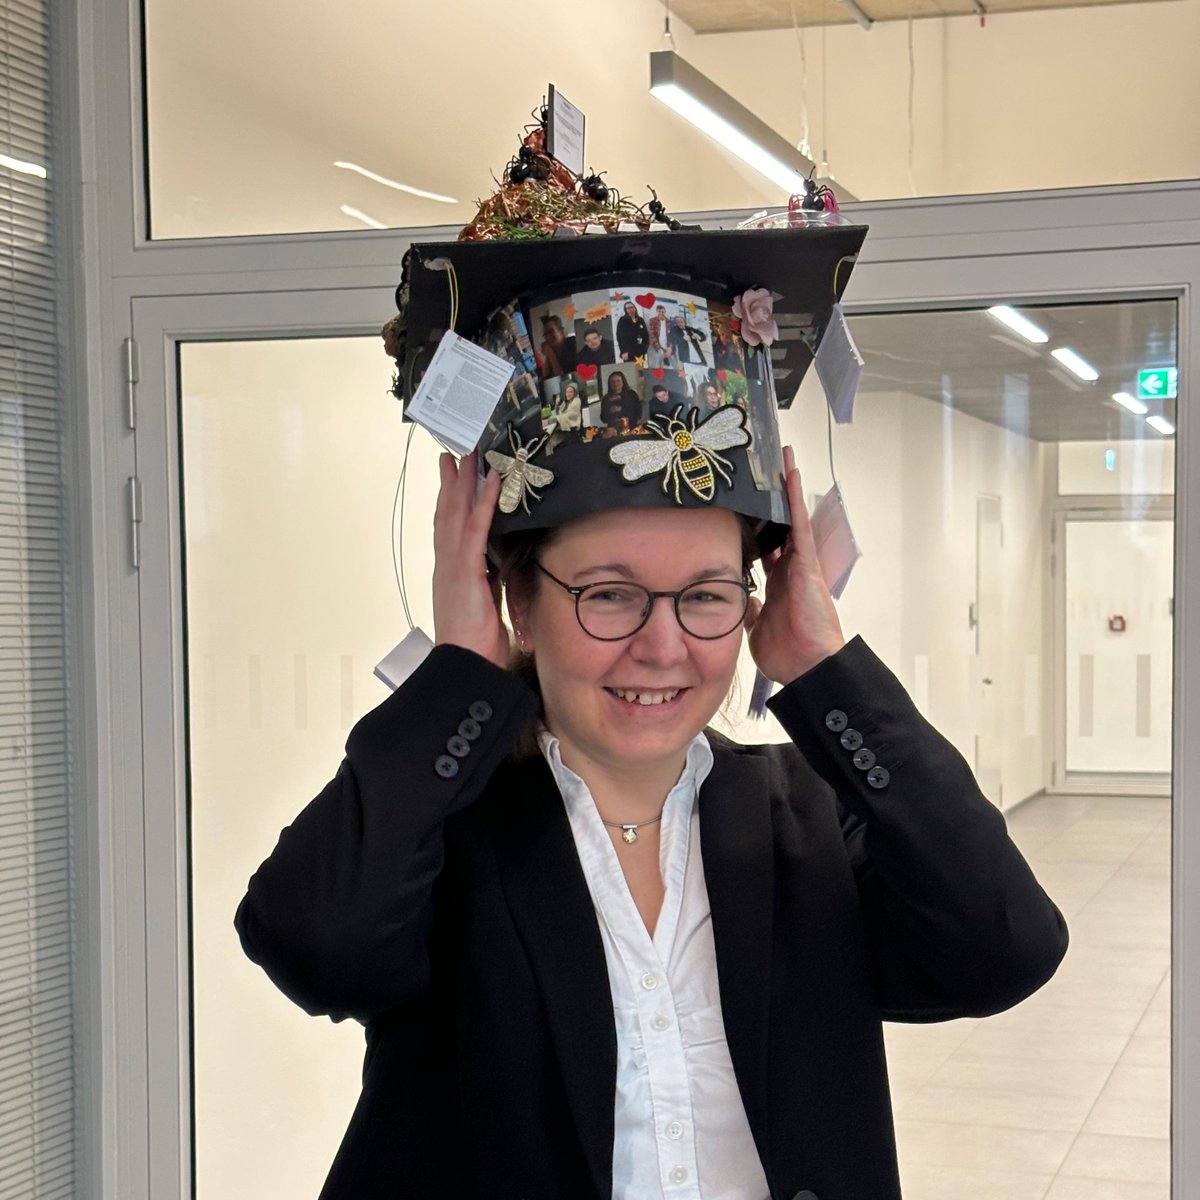 This is what I look like after a successful defense. Thank you very much to all colleagues for the great time with you. Special thanks to my PI @LuddeckeTim!
🐜#Venomics #PhDone #firstgen @jlugiessen @LOEWE_TBG @Fraunhofer_IME